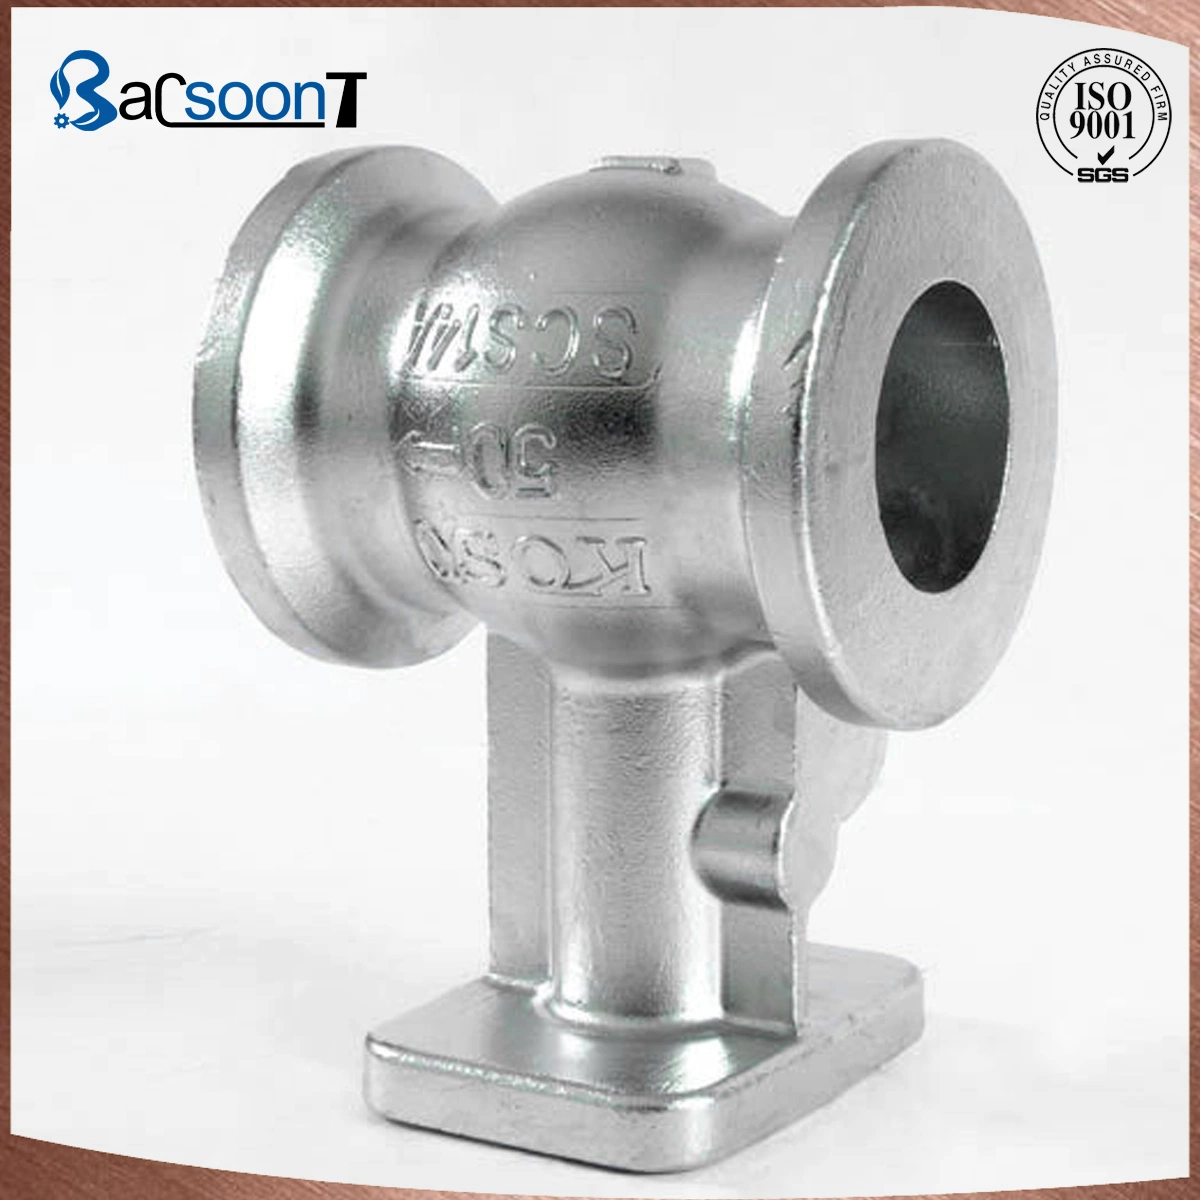 Customized Stainless Steel/Carbon Steel/Steel Lost Wax Casting/Investment Casting Steel Pipe Fitting/Bracket/Flange/Valve Body/Casting with Normalizing in China